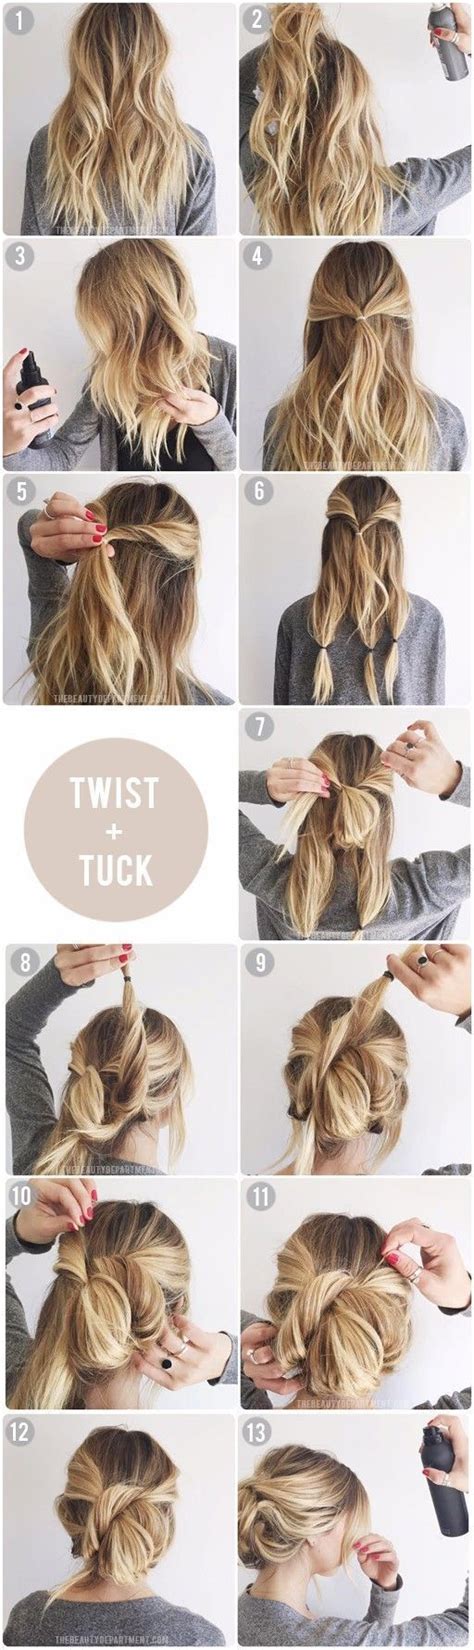 Stunning How To Do Your Own Hair Updo For New Style